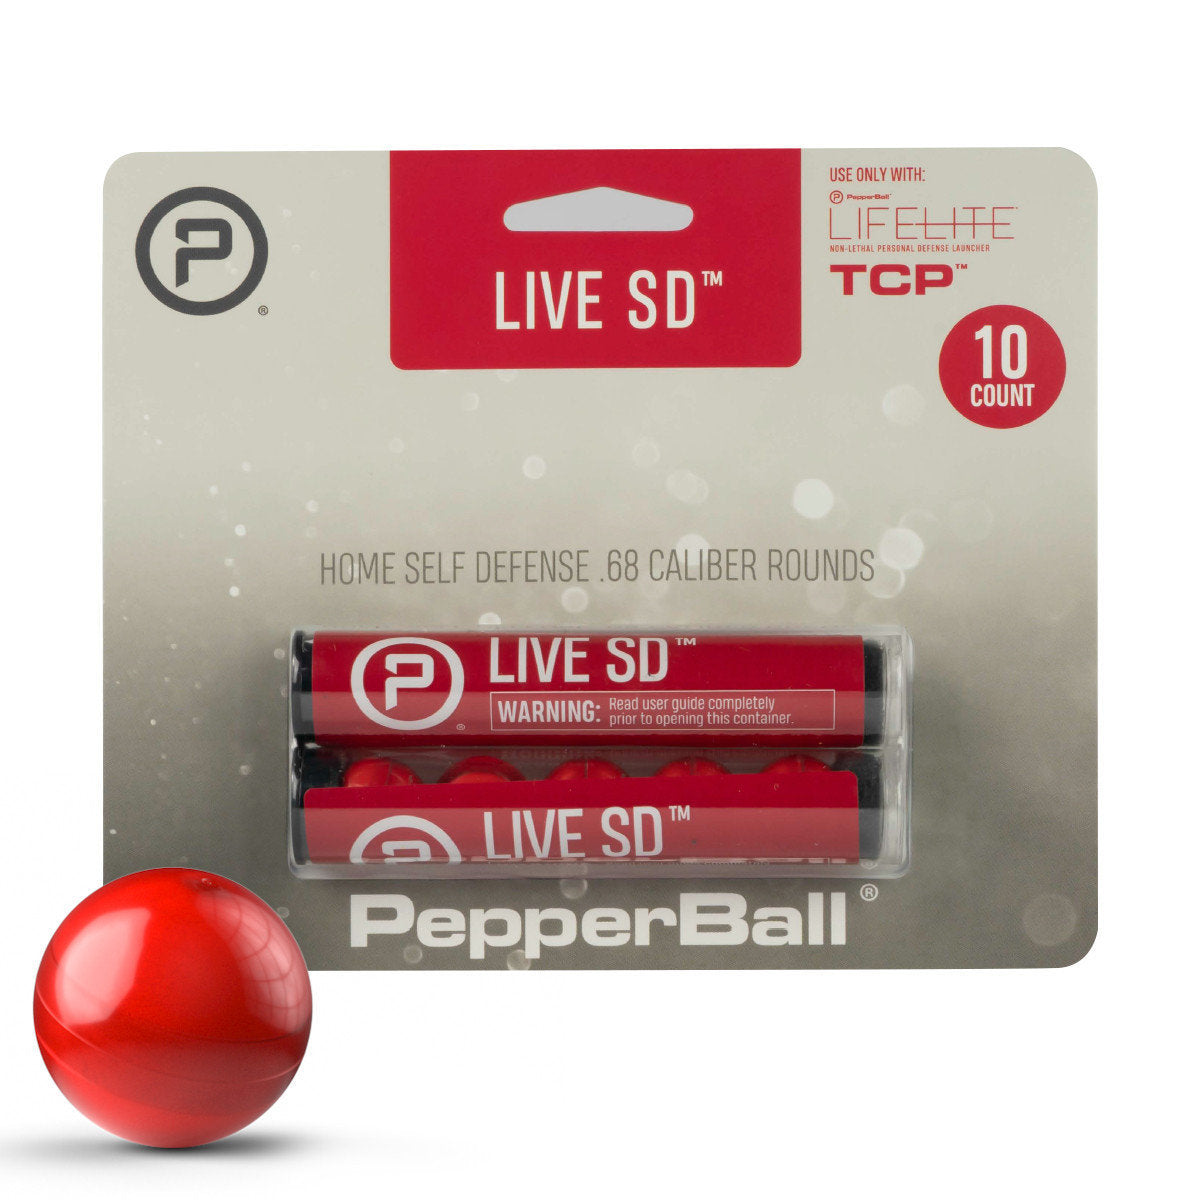 PepperBall LIVE SD .68 Caliber Projectiles (10 PepperBalls) - Eminent Paintball And Airsoft